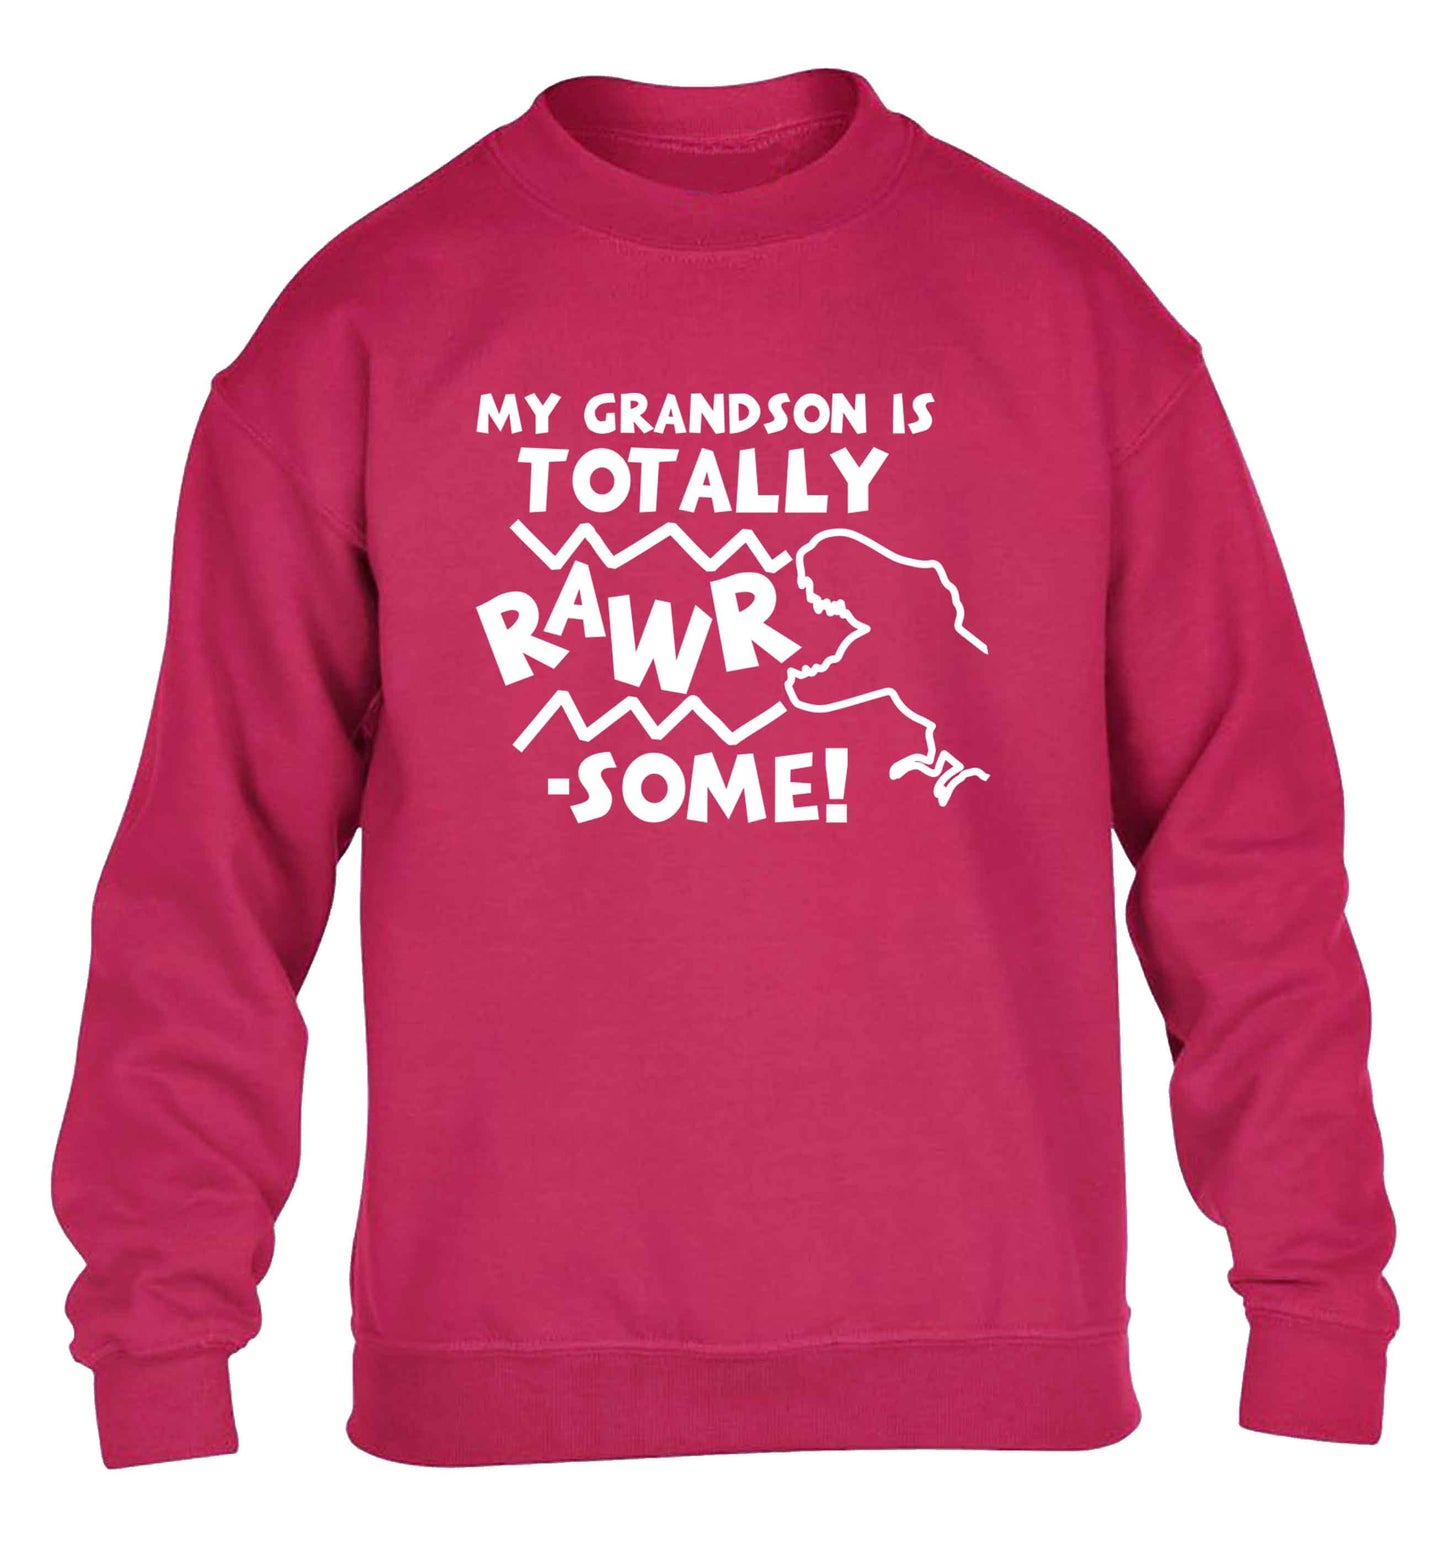 My grandson is totally rawrsome children's pink sweater 12-13 Years